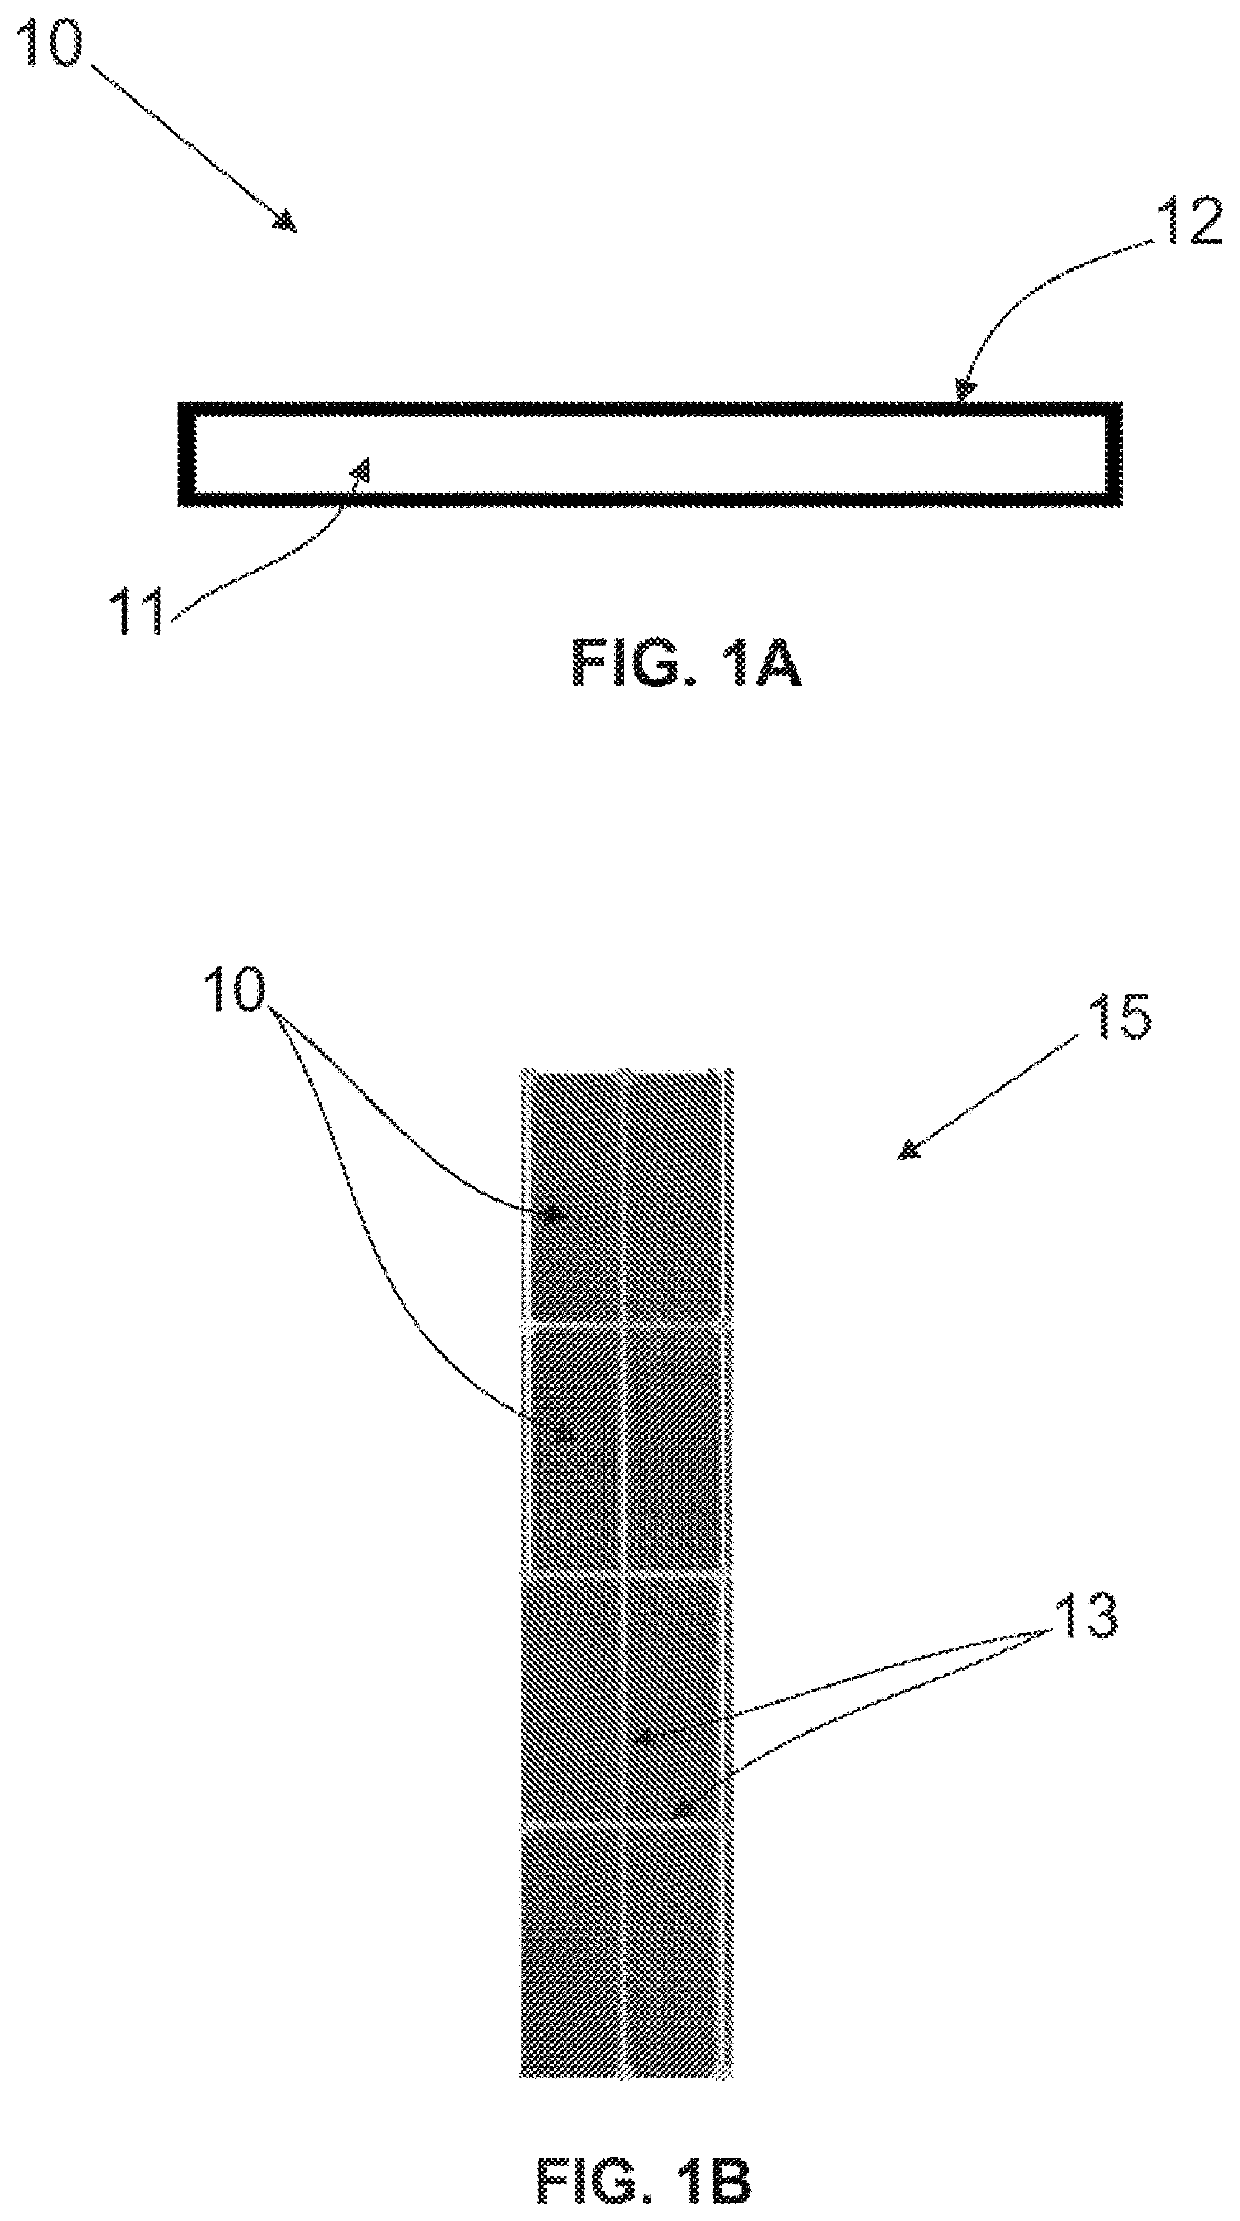 Photovoltaic cell, method for manufacturing an encapsulated photovoltaic cell, electrical connection unit for a photovoltaic tile, and photovoltaic tile